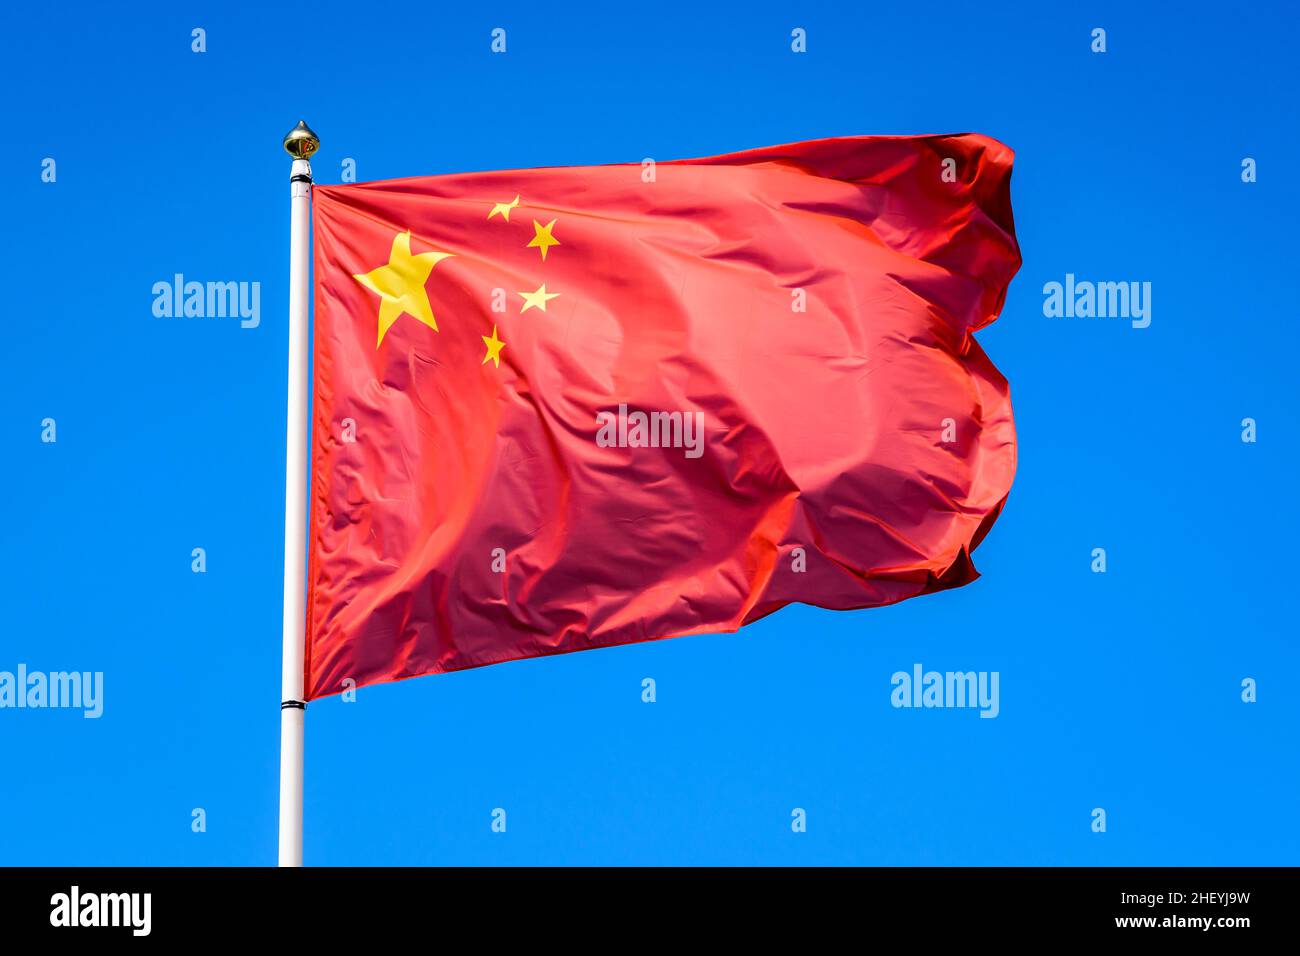 The national flag of the People's Republic of China is flying in the wind at full mast against blue sky. Stock Photo